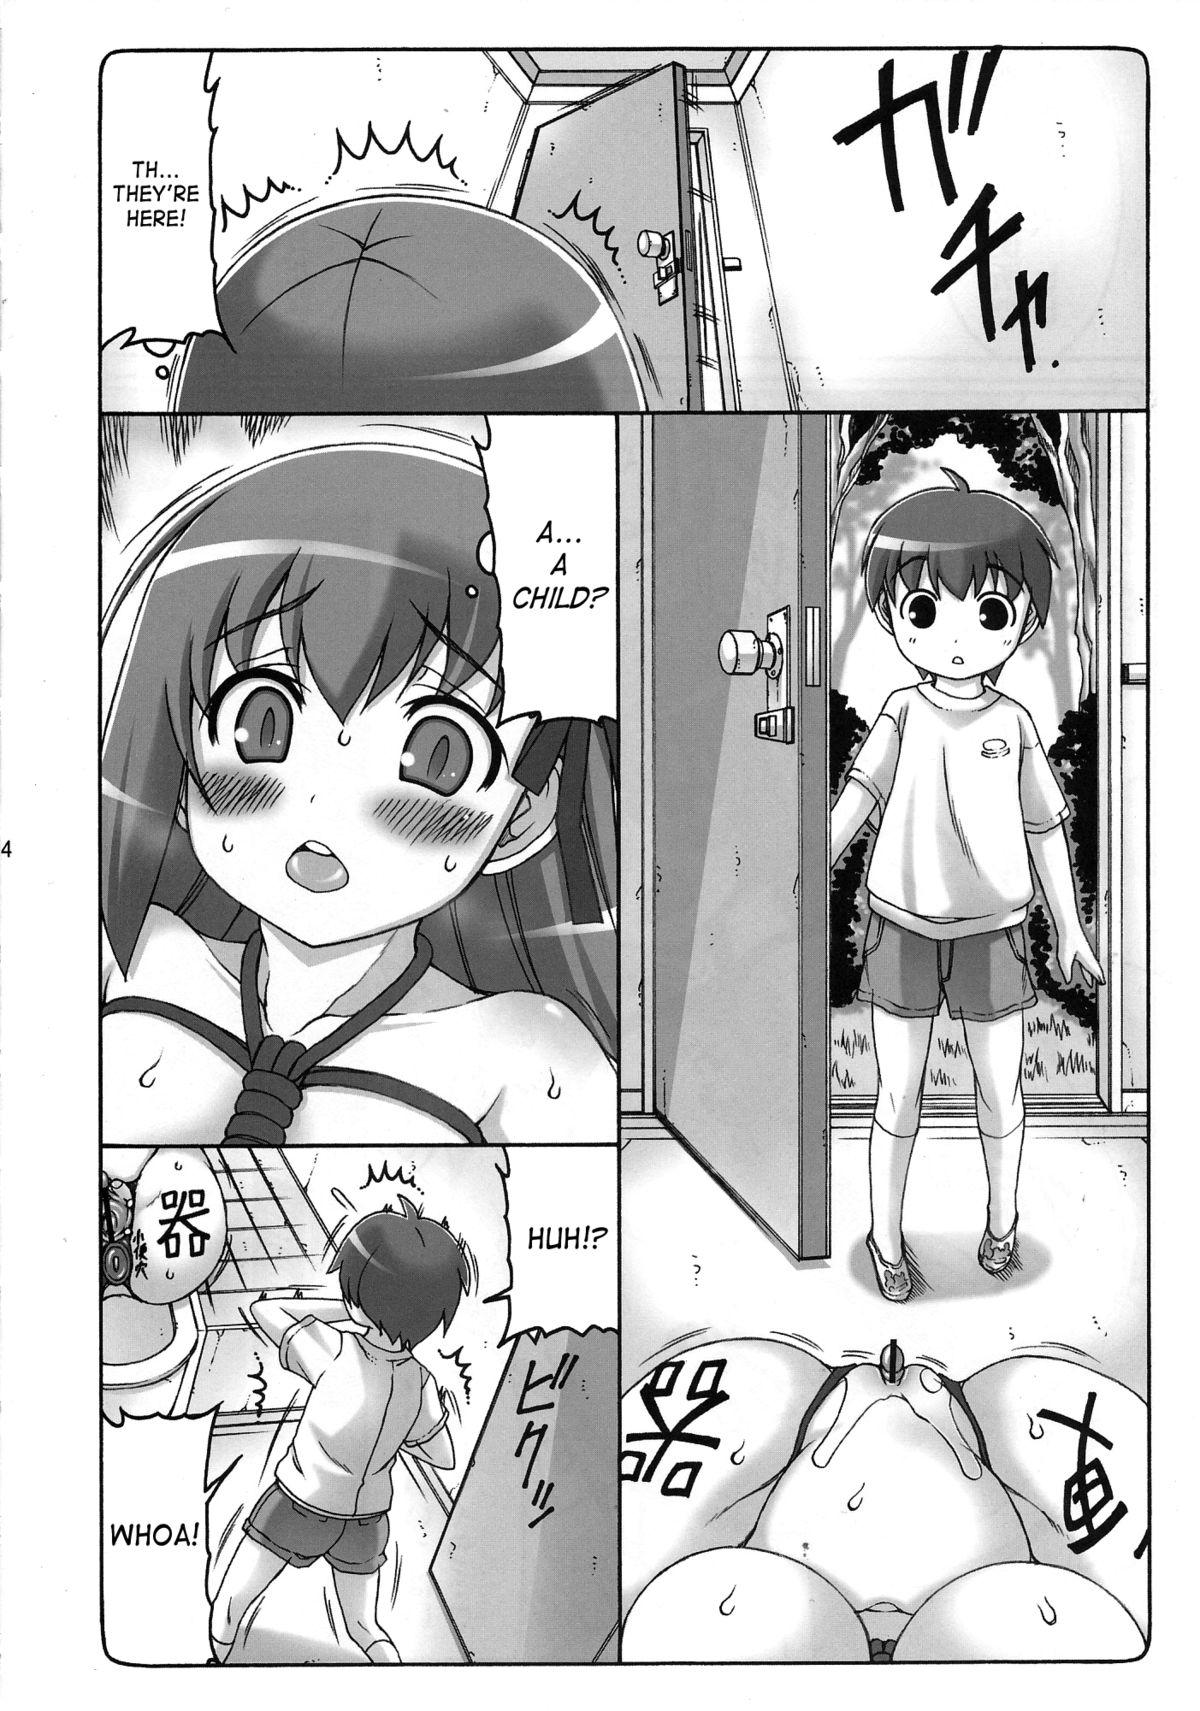 Sologirl Kotori 9 - Fate stay night Ass Worship - Page 13